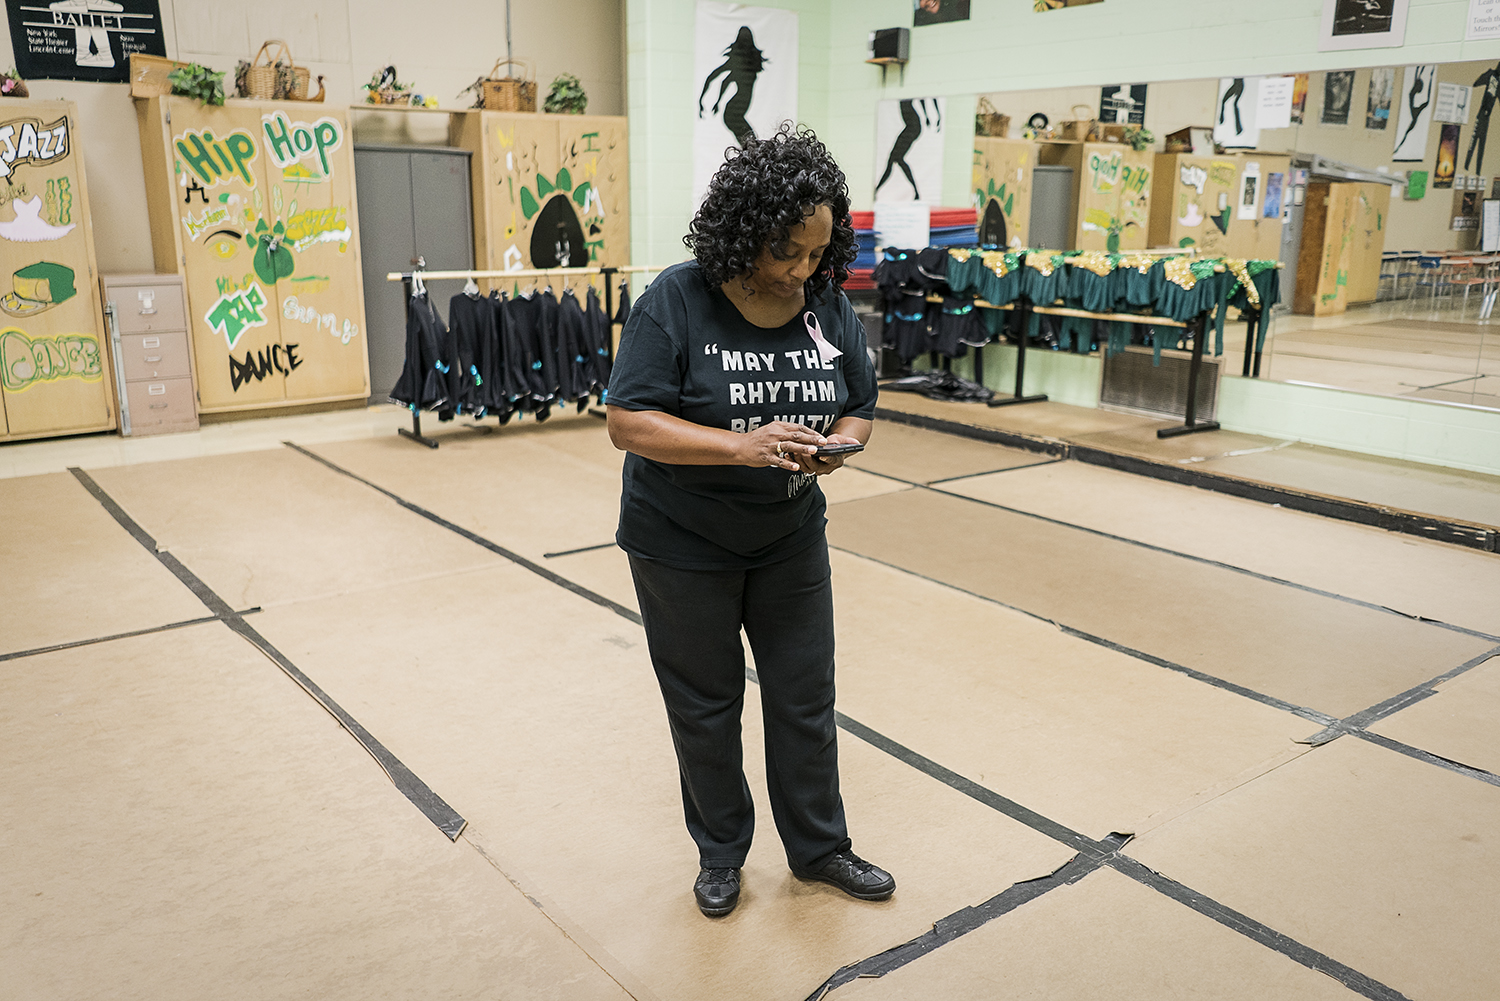 With work still to be done, Sheila Miller-Graham checks her phone while on the dance floor of her classroom at Flint Northwestern High School. Miller-Graham wears many hats between the high school, her dance studio and her church. She considers givin